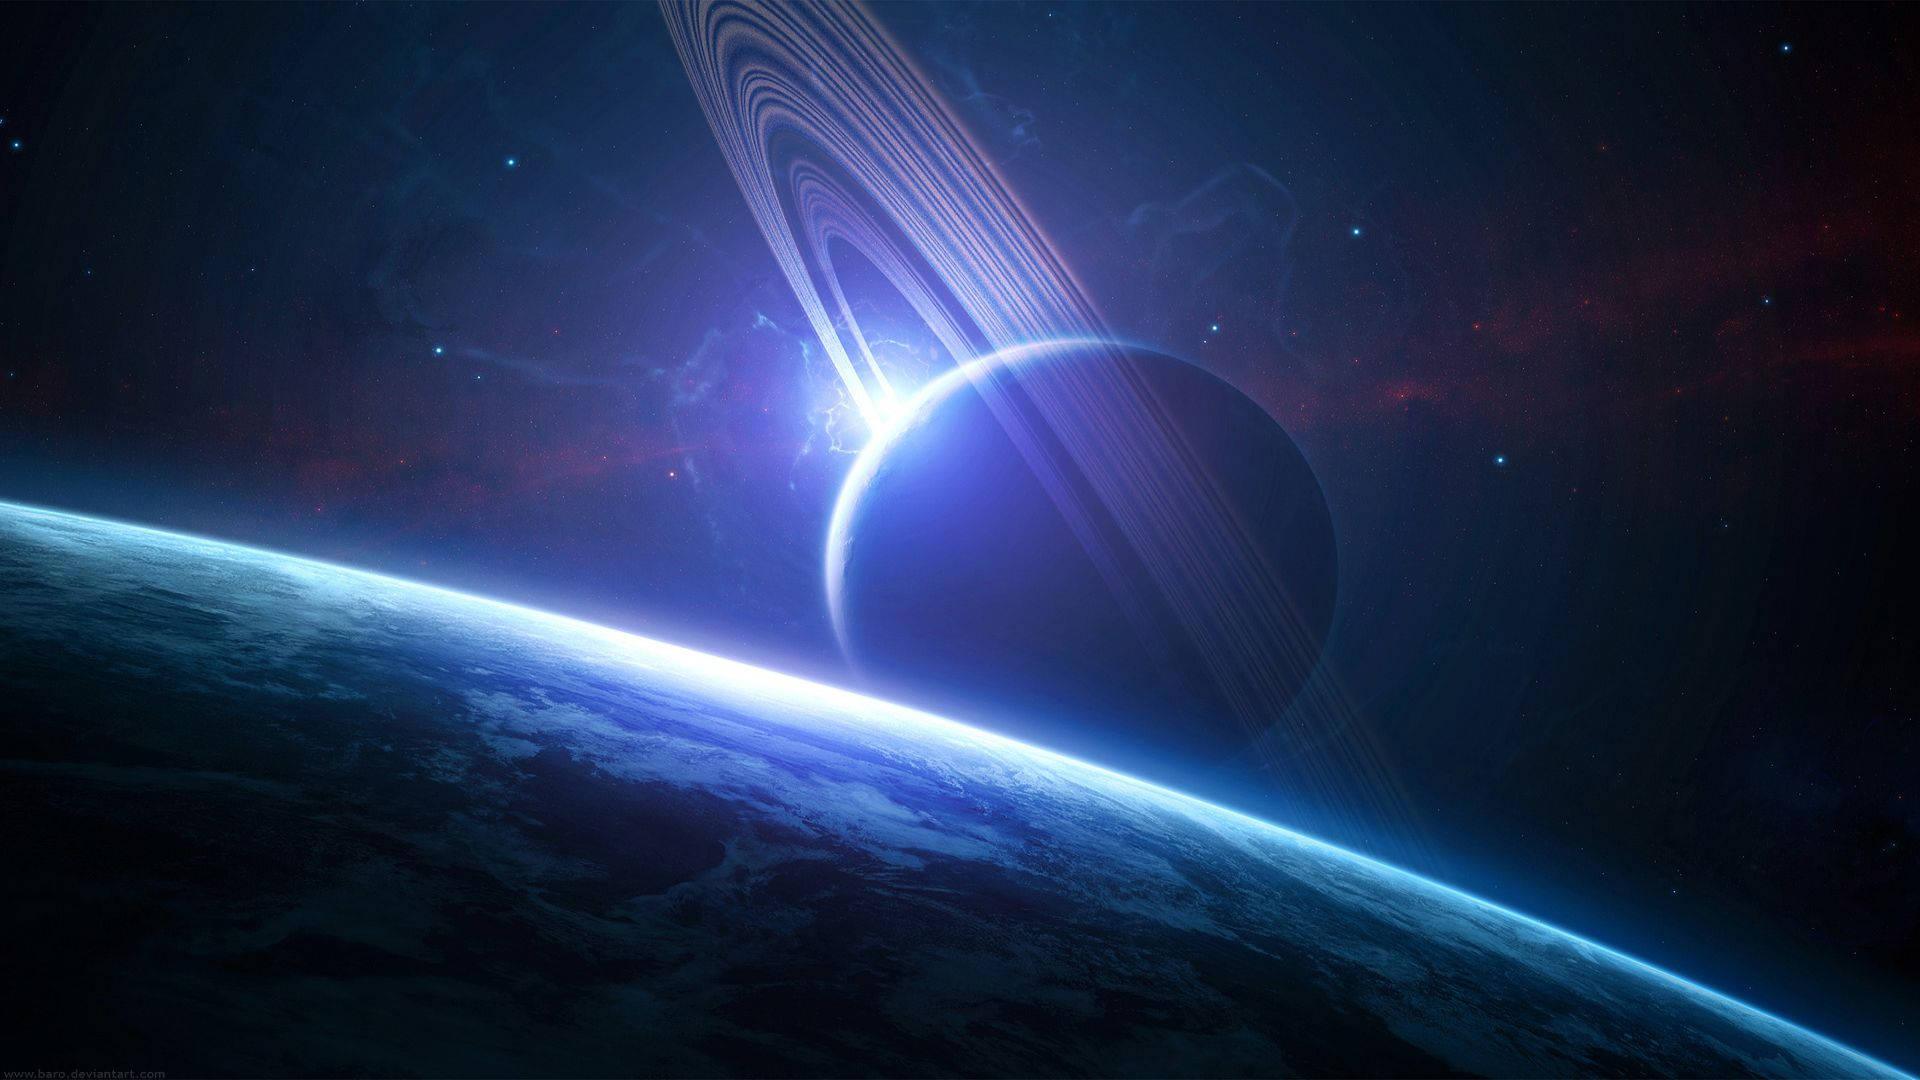 Free Space Wallpaper Downloads, [700+] Space Wallpapers for FREE |  